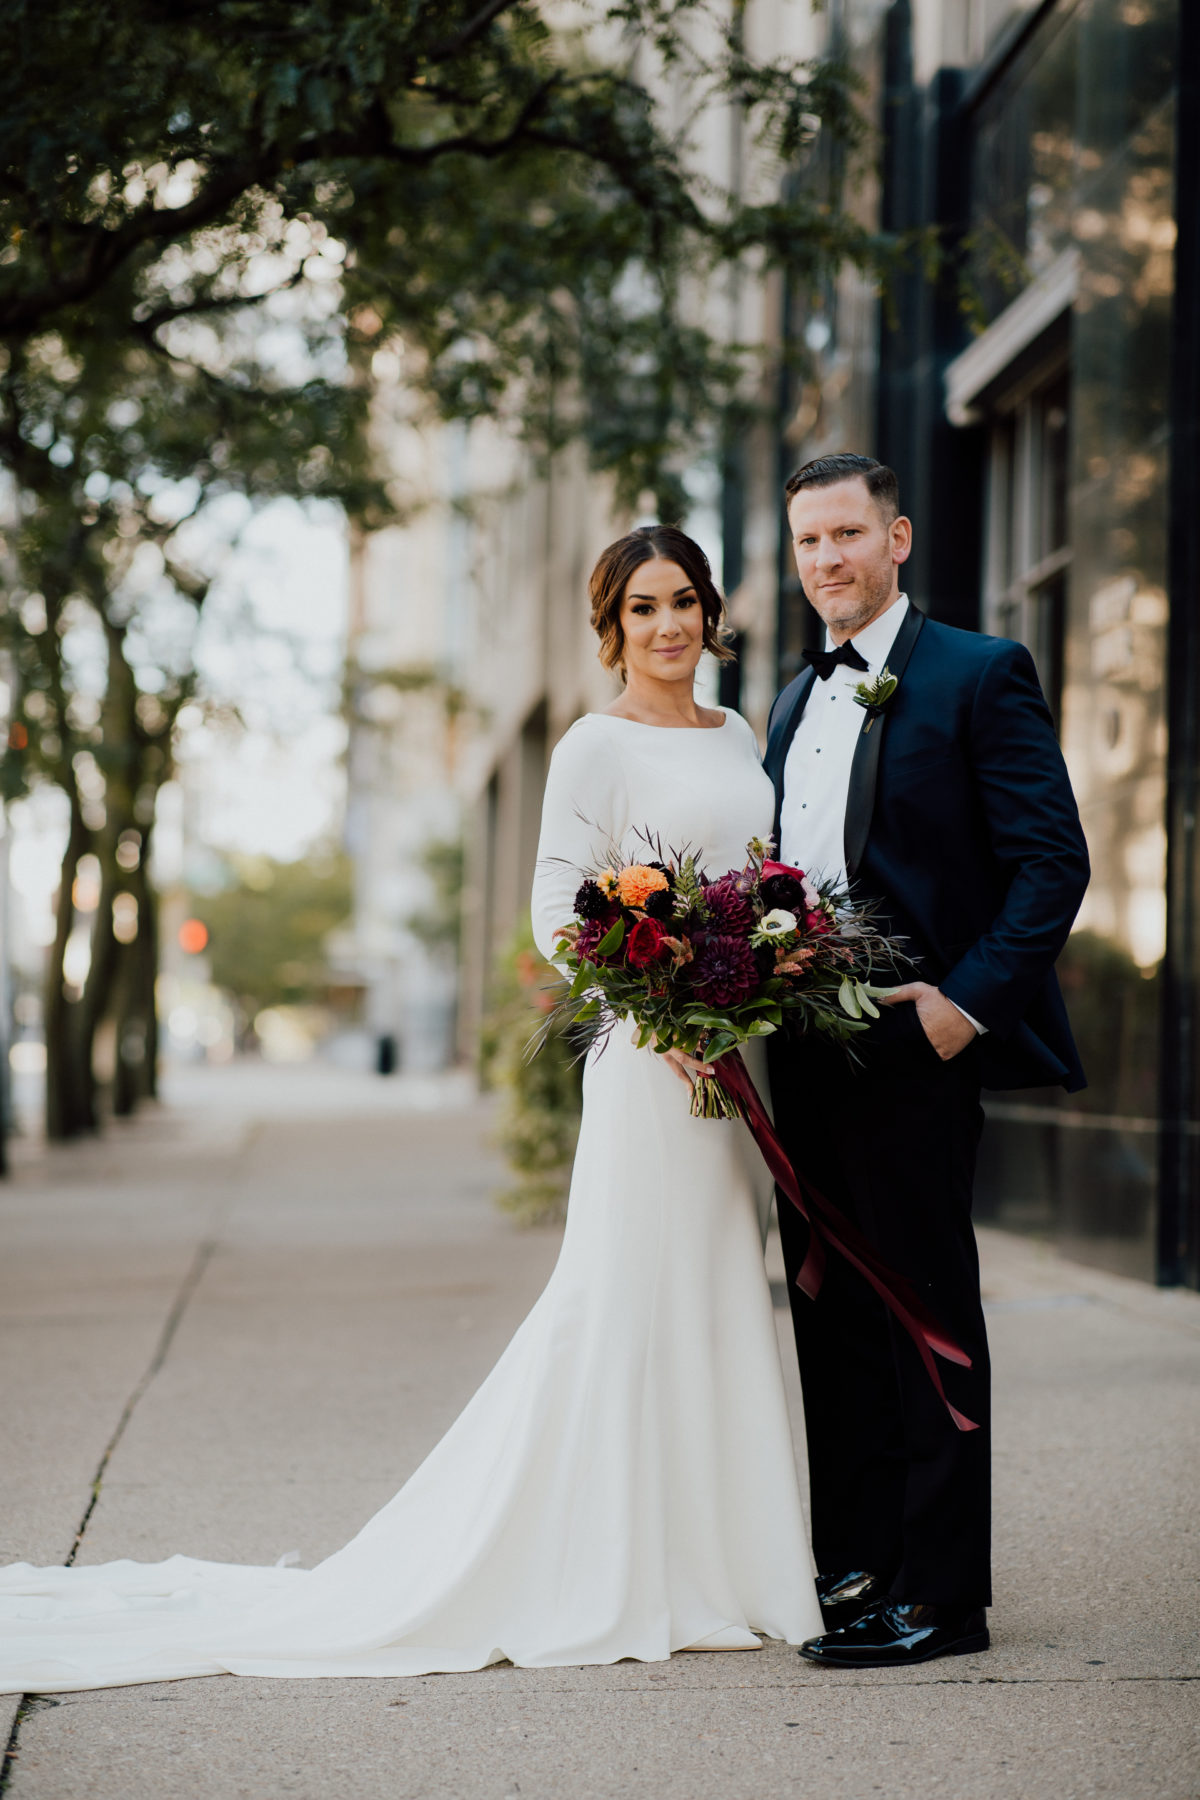 The Grande Hall at Liberty Tower Wedding by Carrs Photography